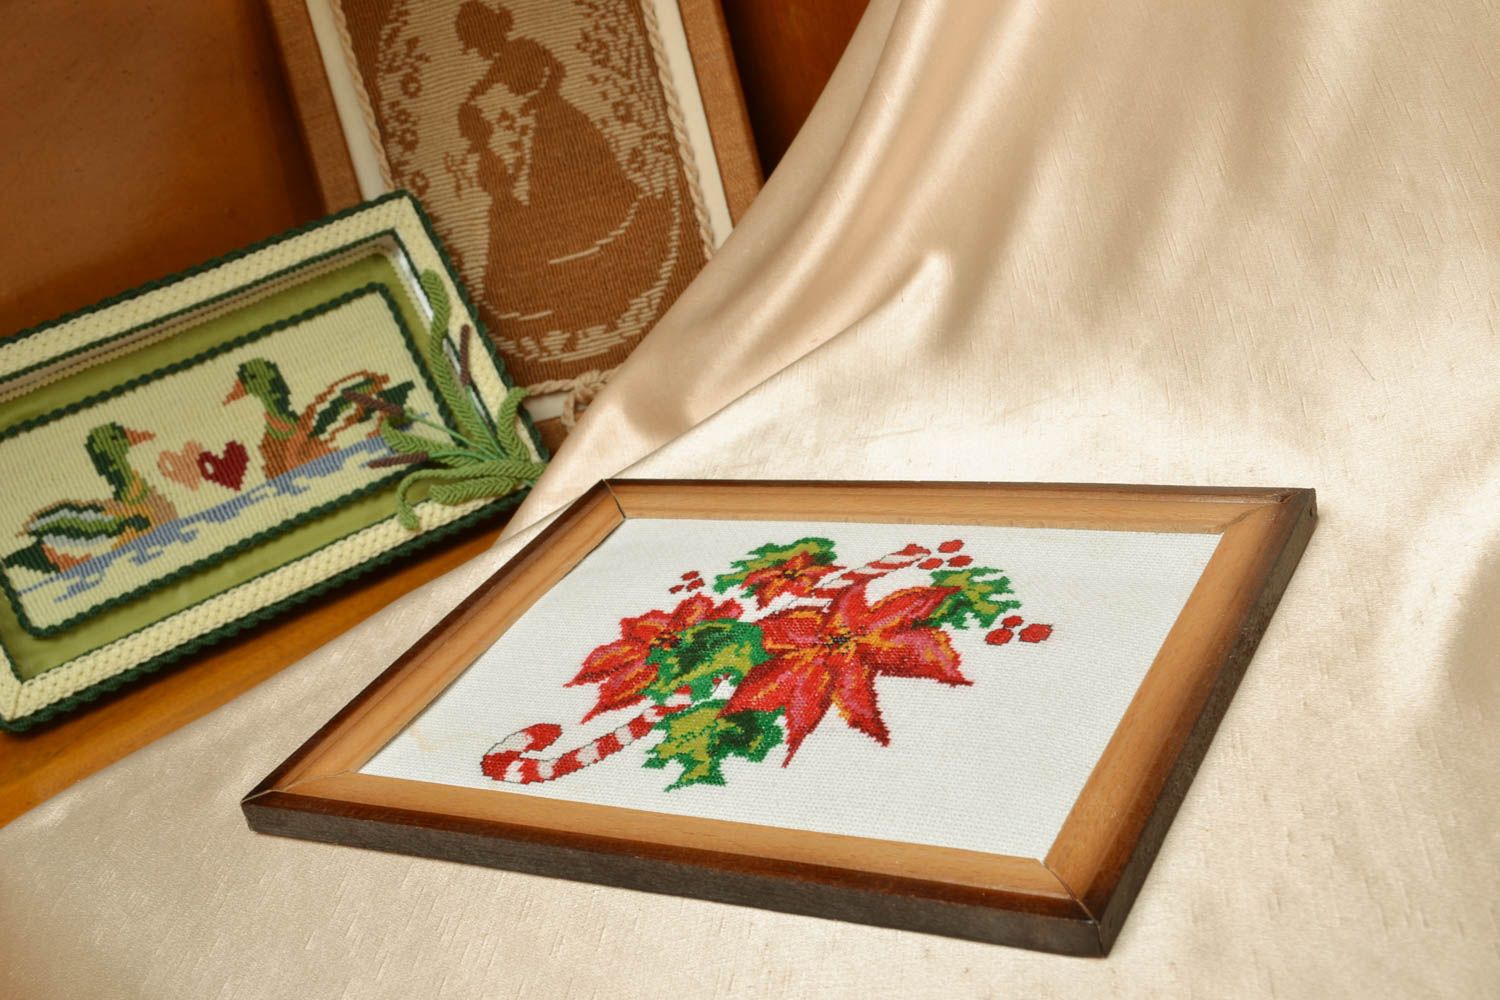 Embroidered picture photo 5